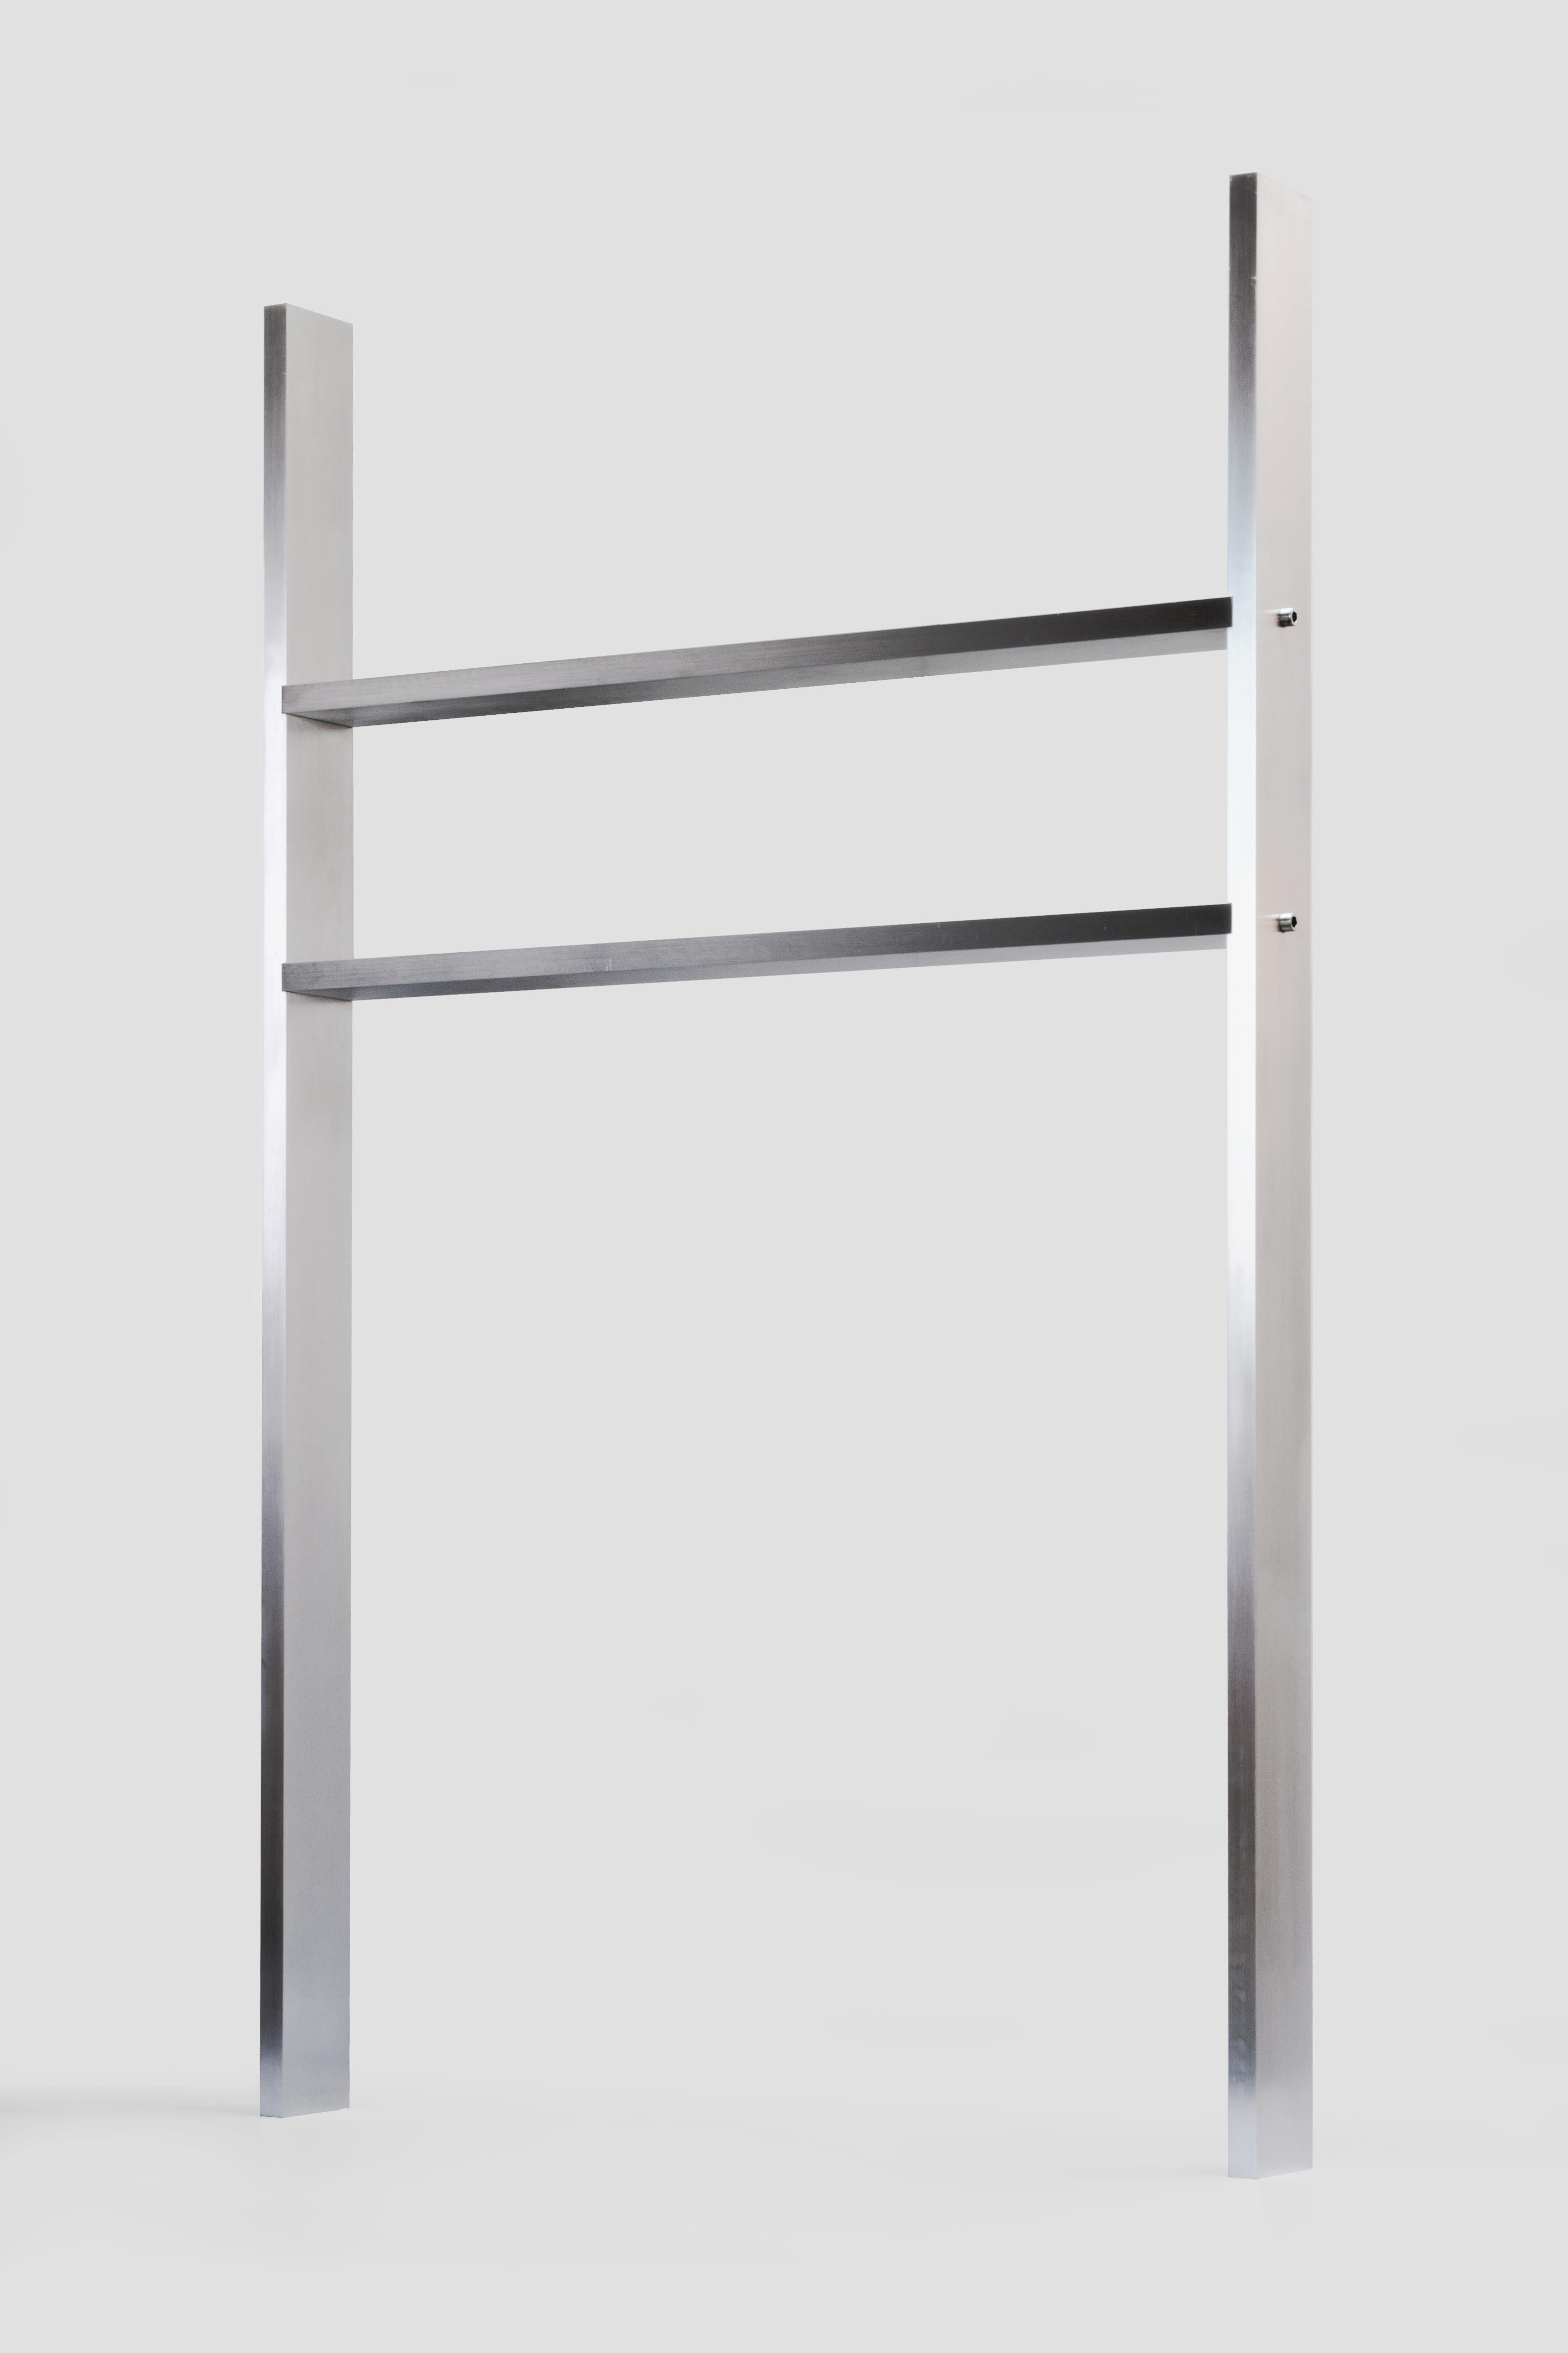 Contemporary minimalistic shelf in waxed aluminum by Johan Viladrich
Shelf
Brushed and waxed aluminum
Measures: H190, L115, W12
Apprx. 60kg
Limited Edition of 4 + 1AP

It is a sculptural composition made of four brushed aluminum profiles